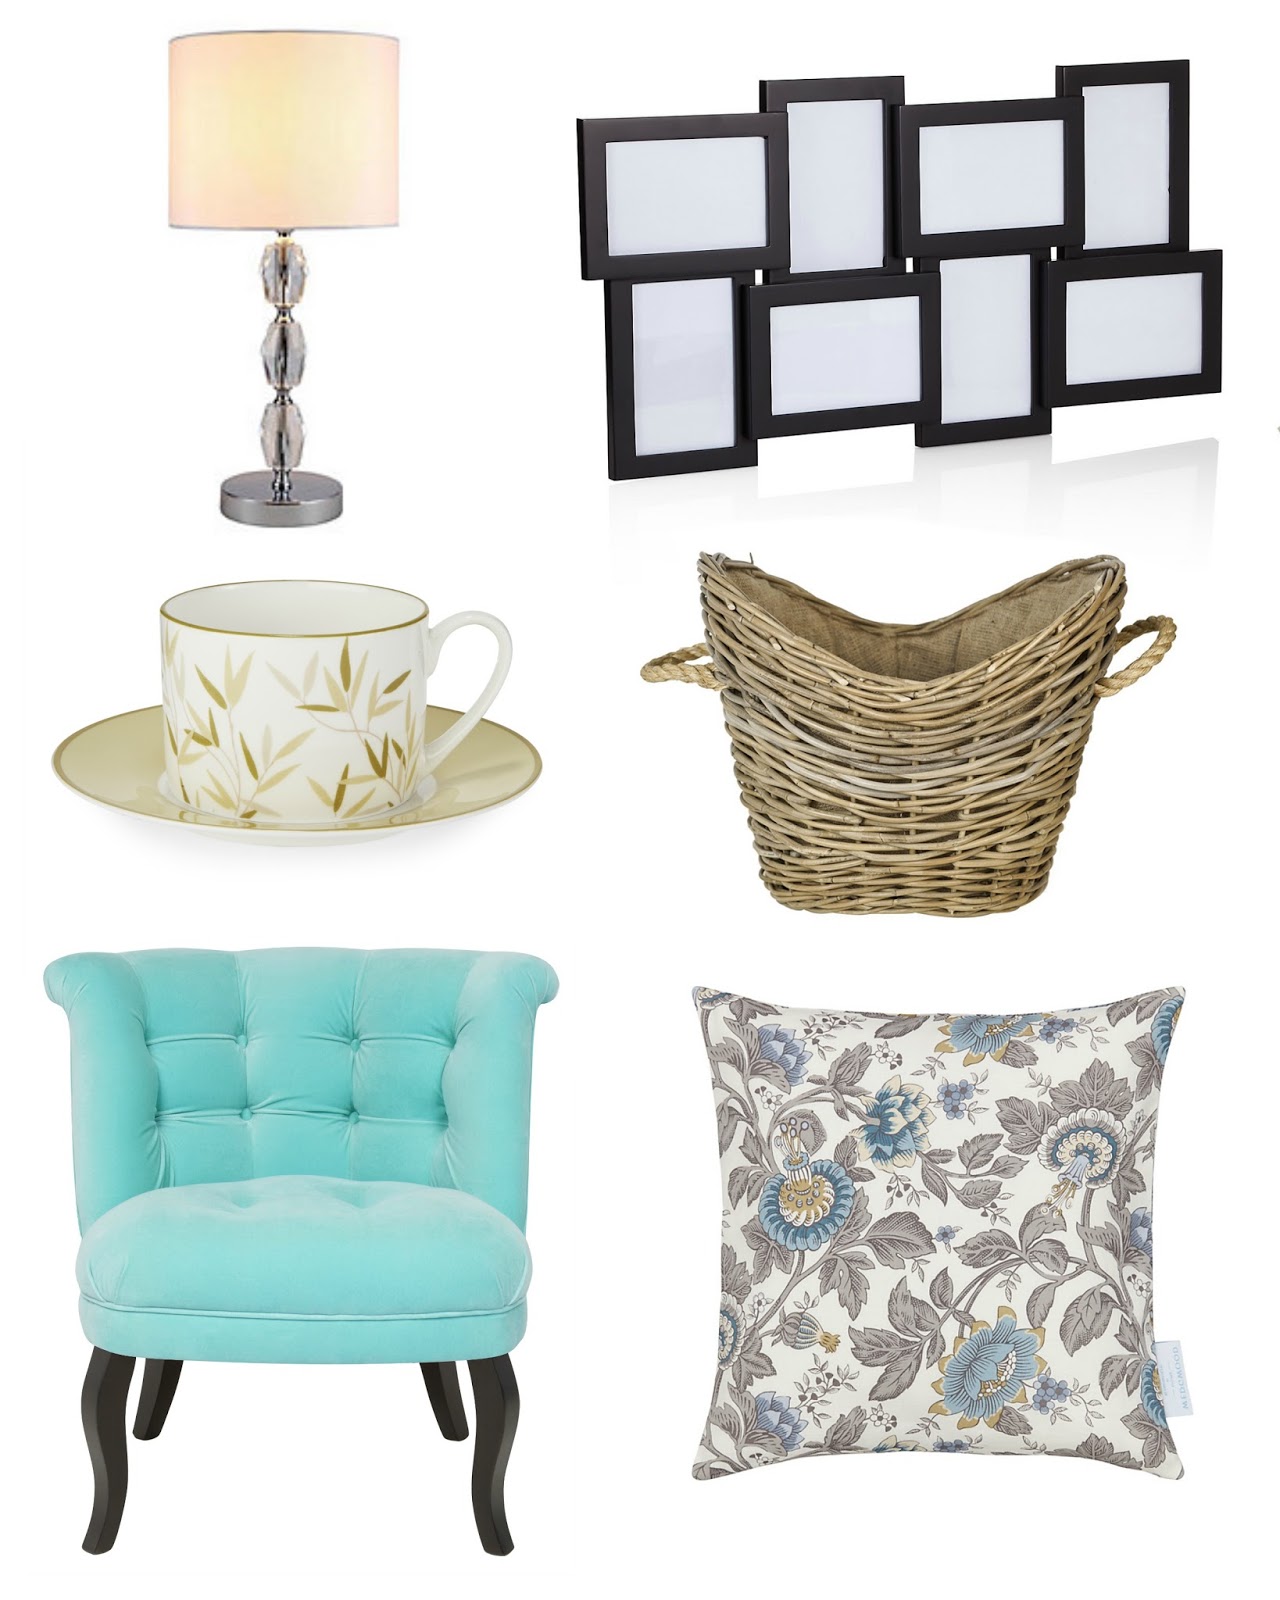 mamasVIB | V. I. BUYS: Babington House 15 ways to create the look at home {Staycation Style #1} 